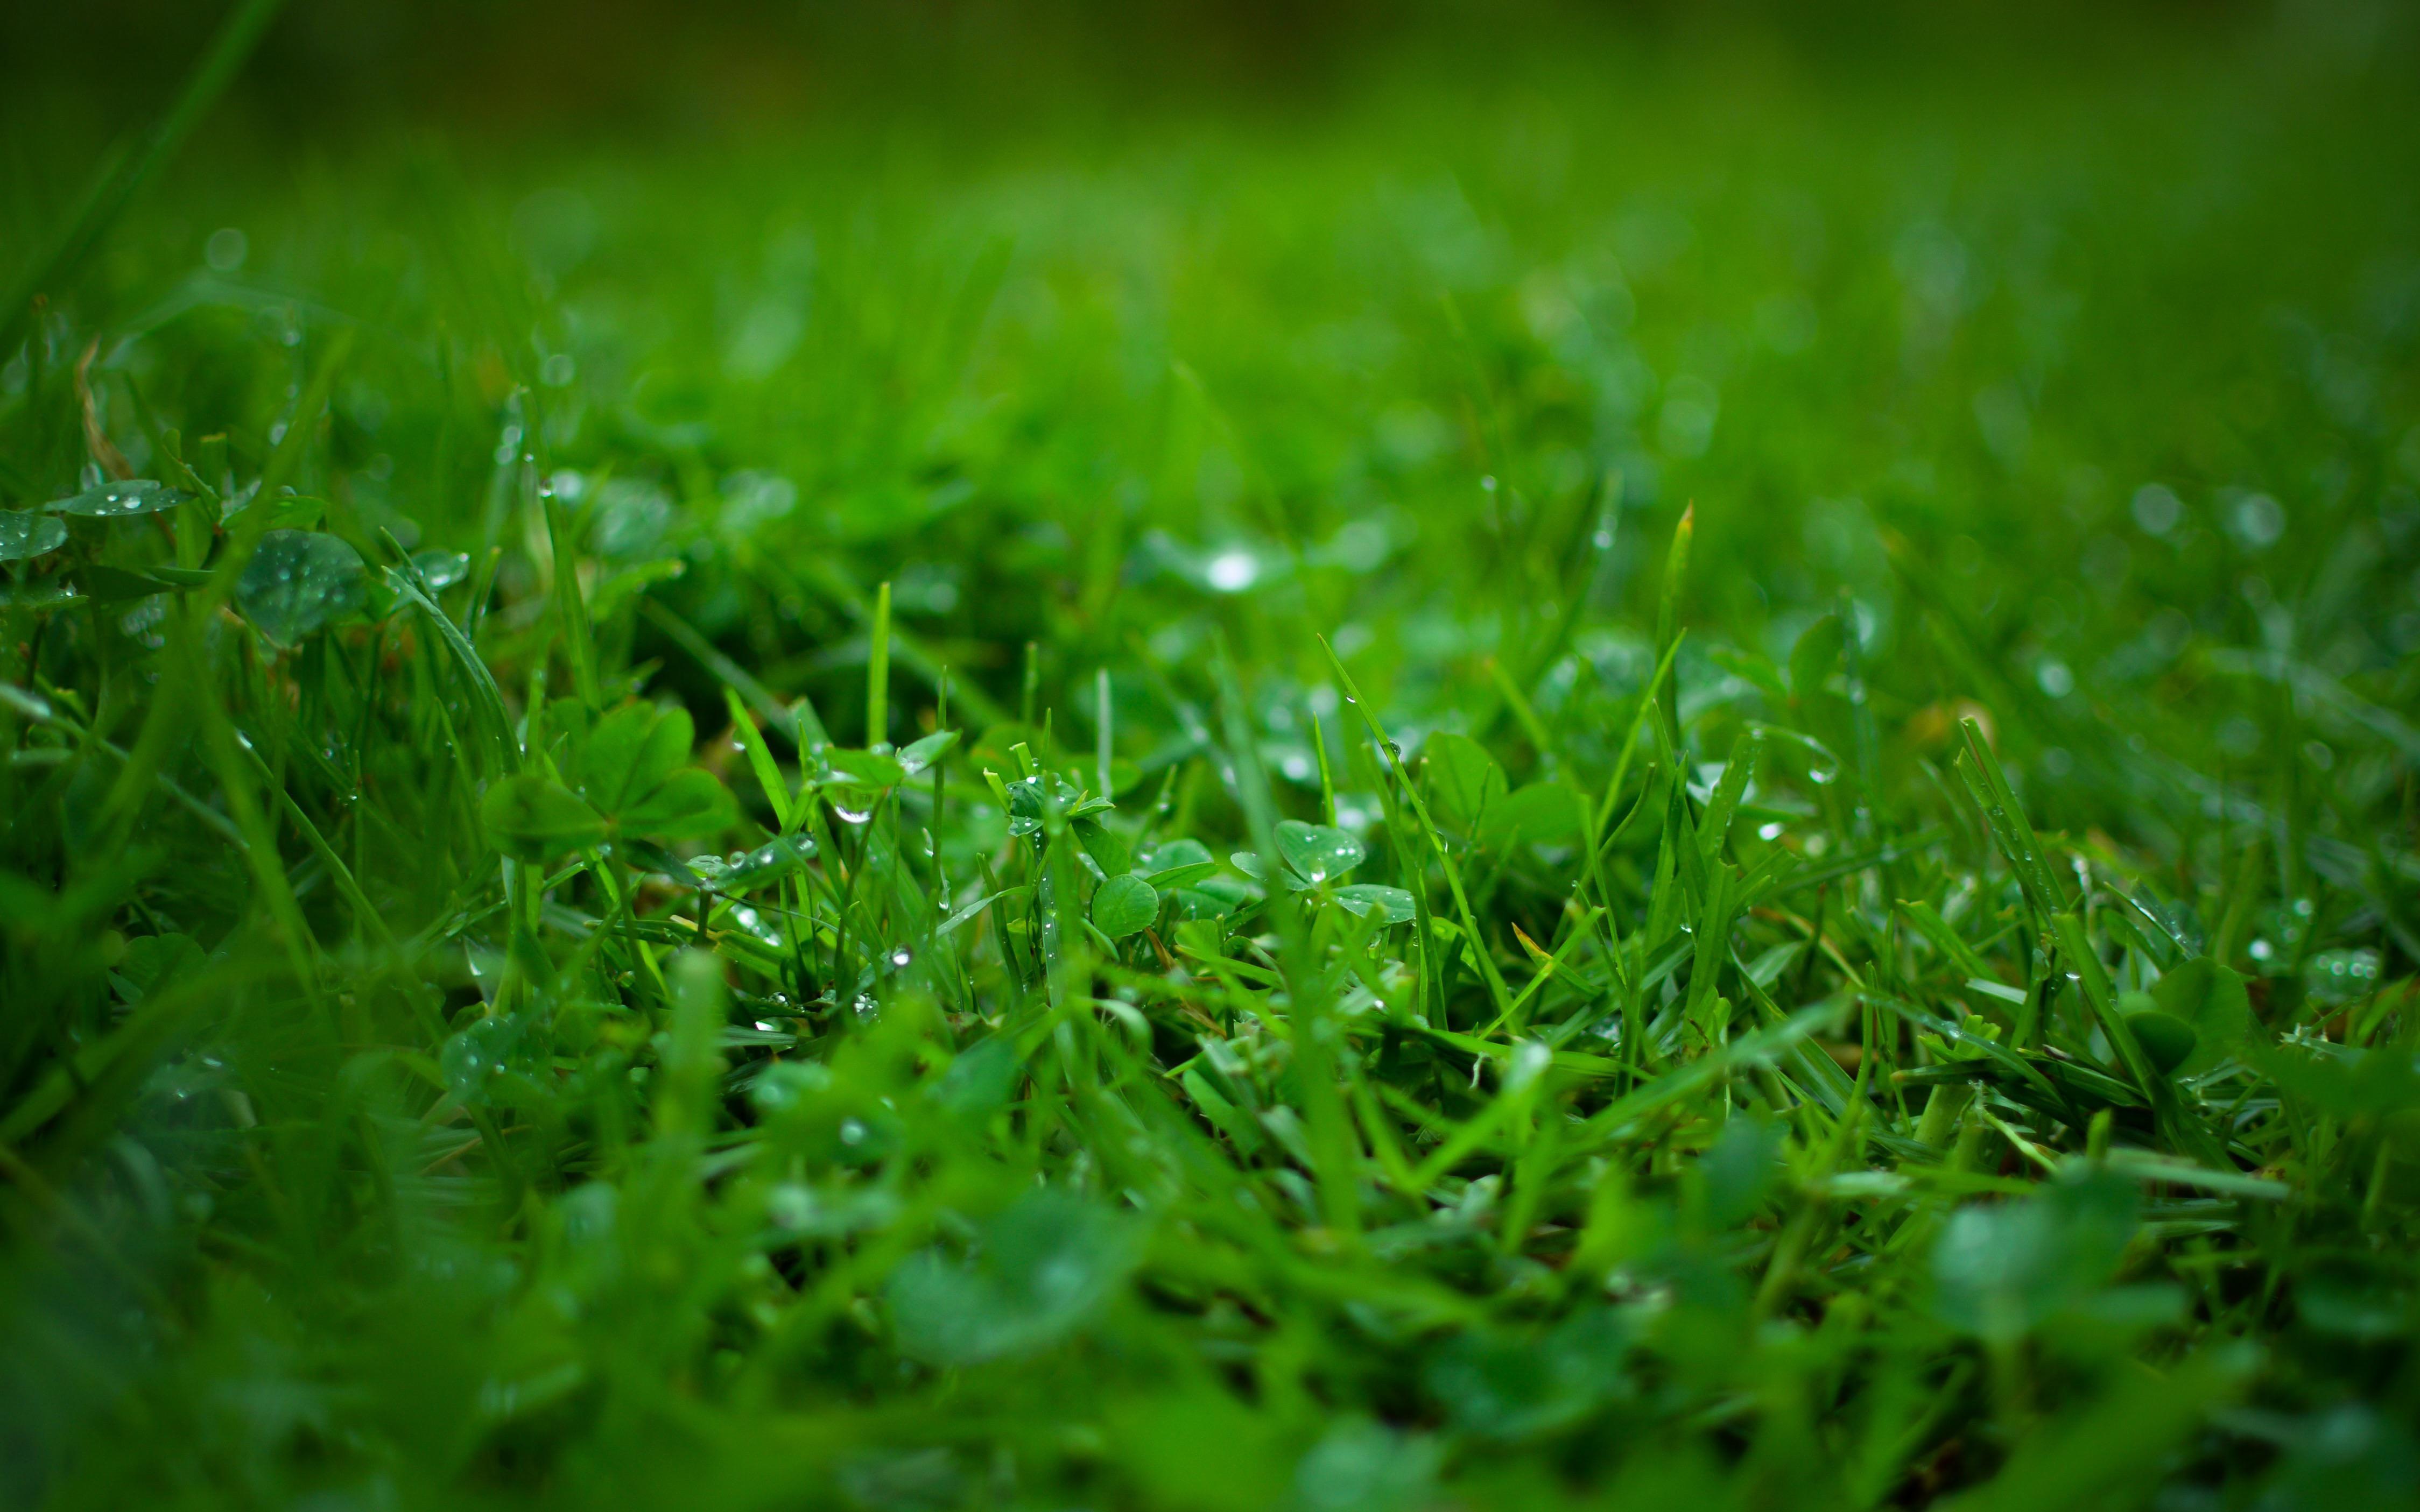 Grass 4K wallpapers for your desktop or mobile screen free and easy to